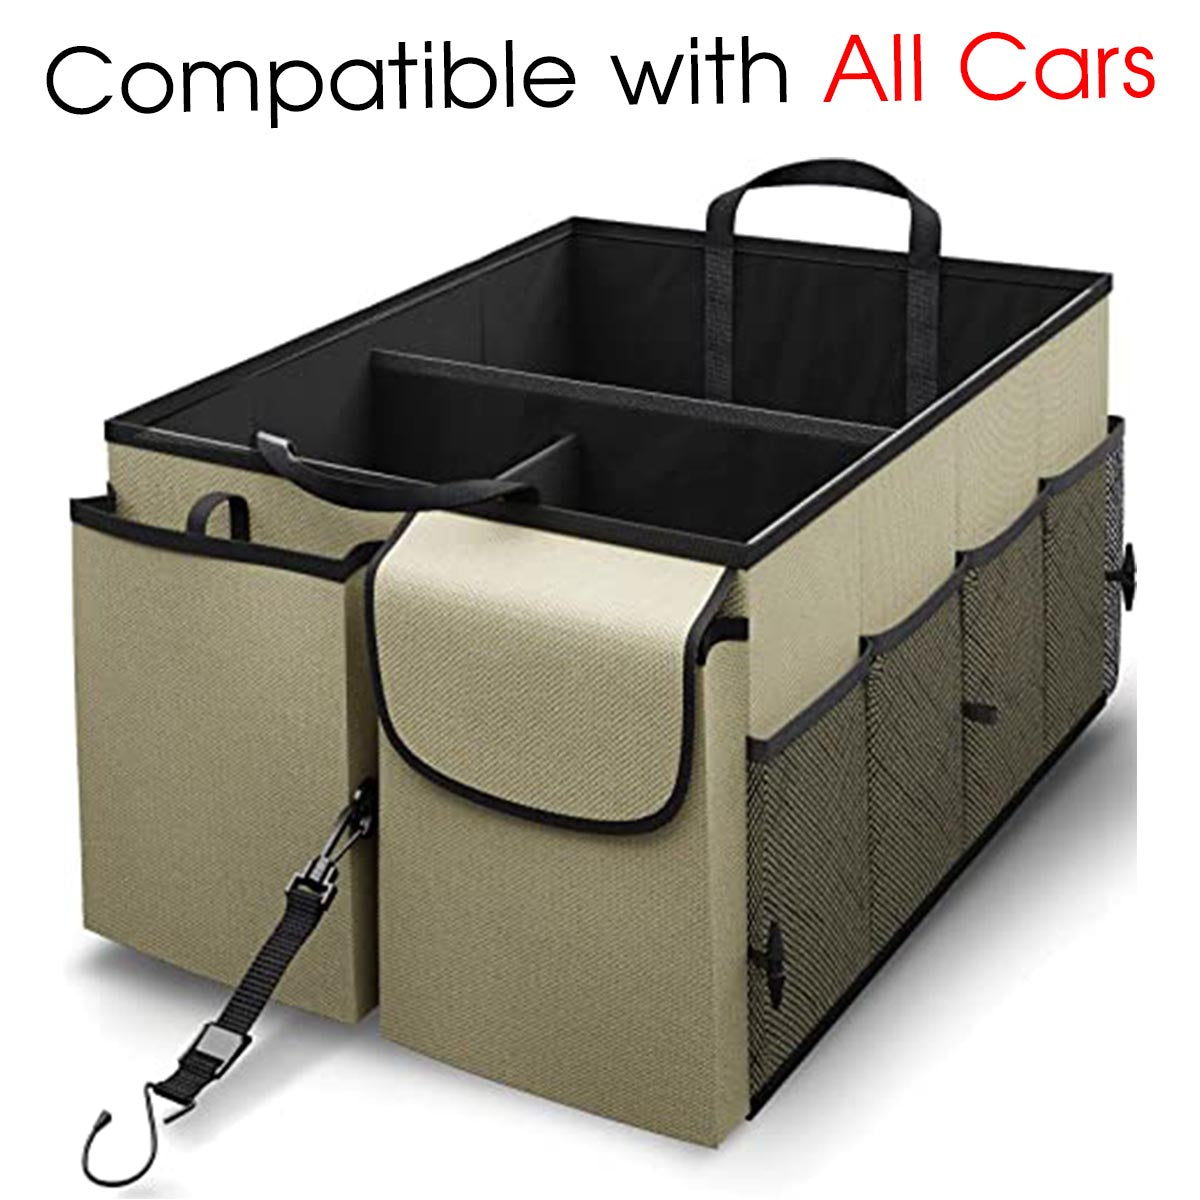 Car Trunk Organizer - Collapsible, Custom fit for All Cars, Multi-Compartment Automotive SUV Car Organizer for Storage w/ Adjustable Straps - Car Accessories for Women and Men MY12993